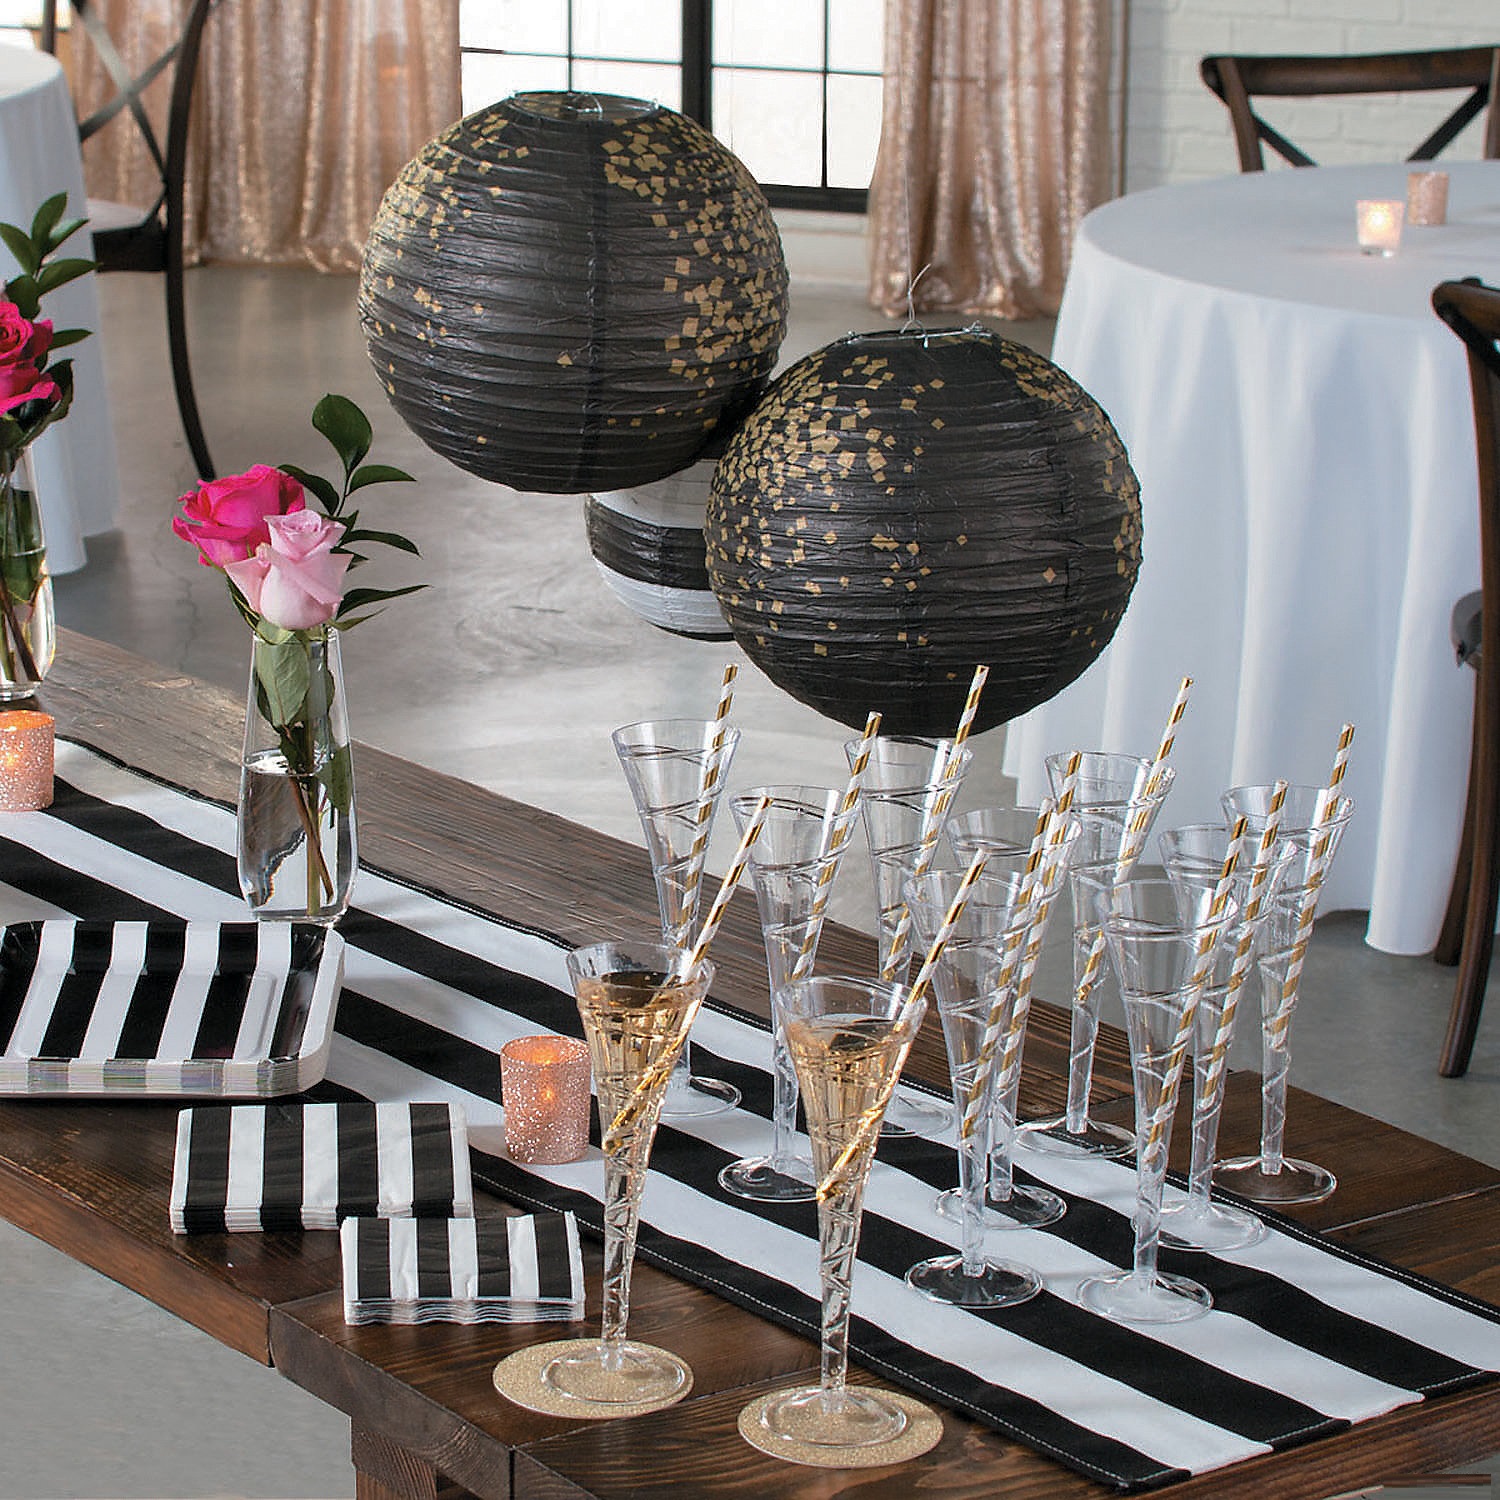 10-black-and-gold-patterned-hanging-paper-lanterns-6-pc-_13765549-a02